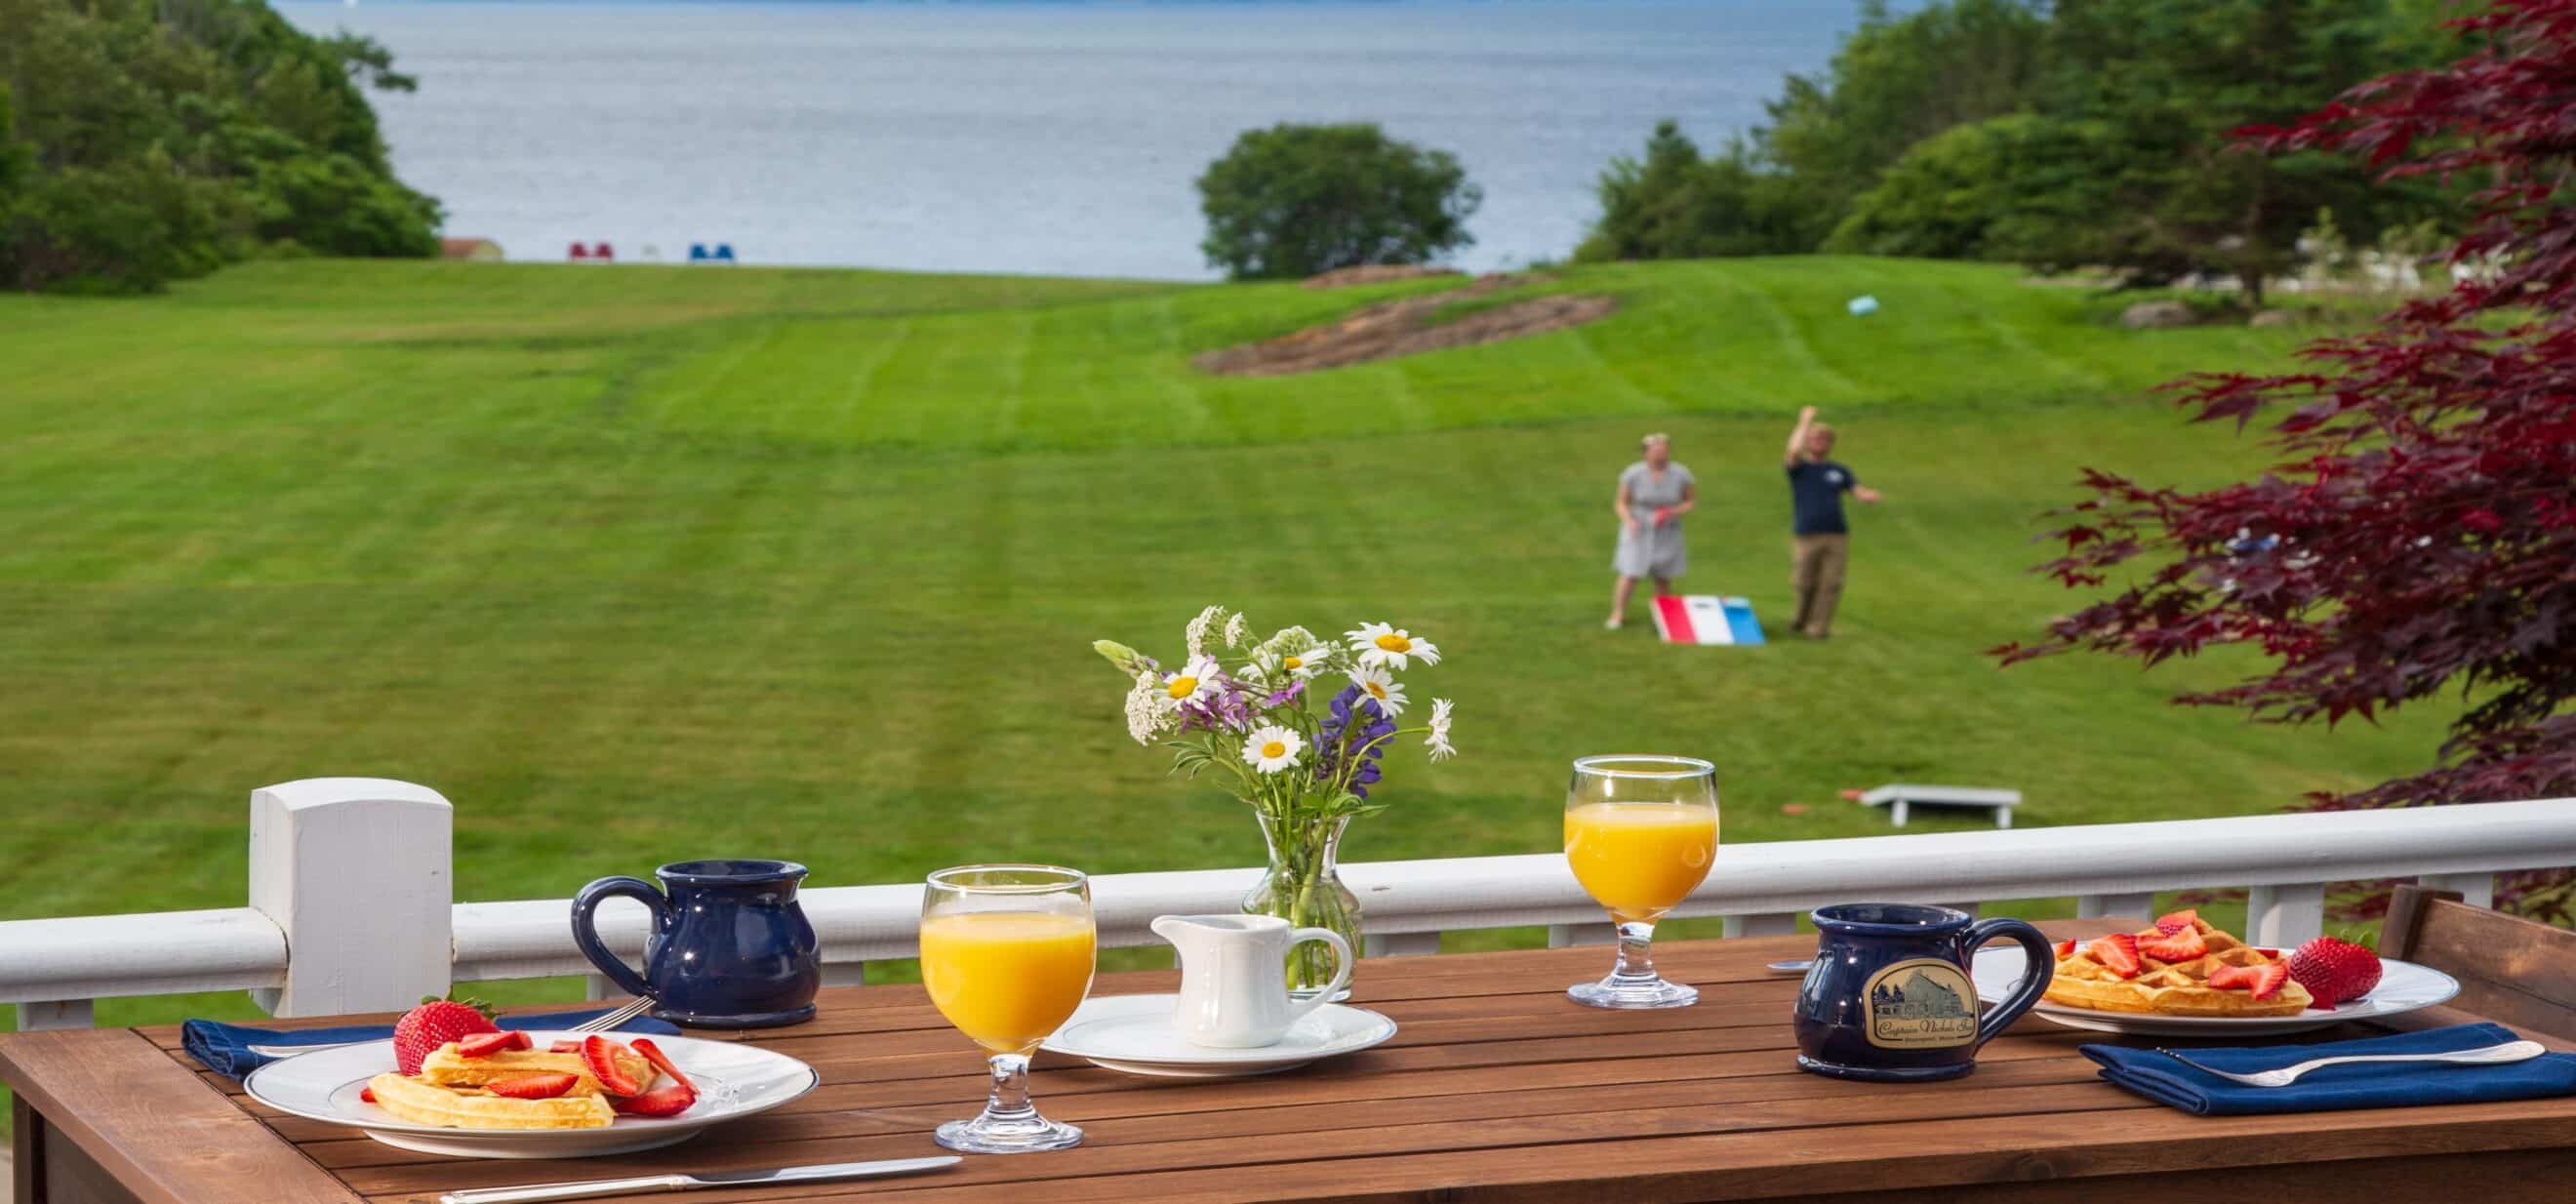 breakfast served with water views as guests play cornhole